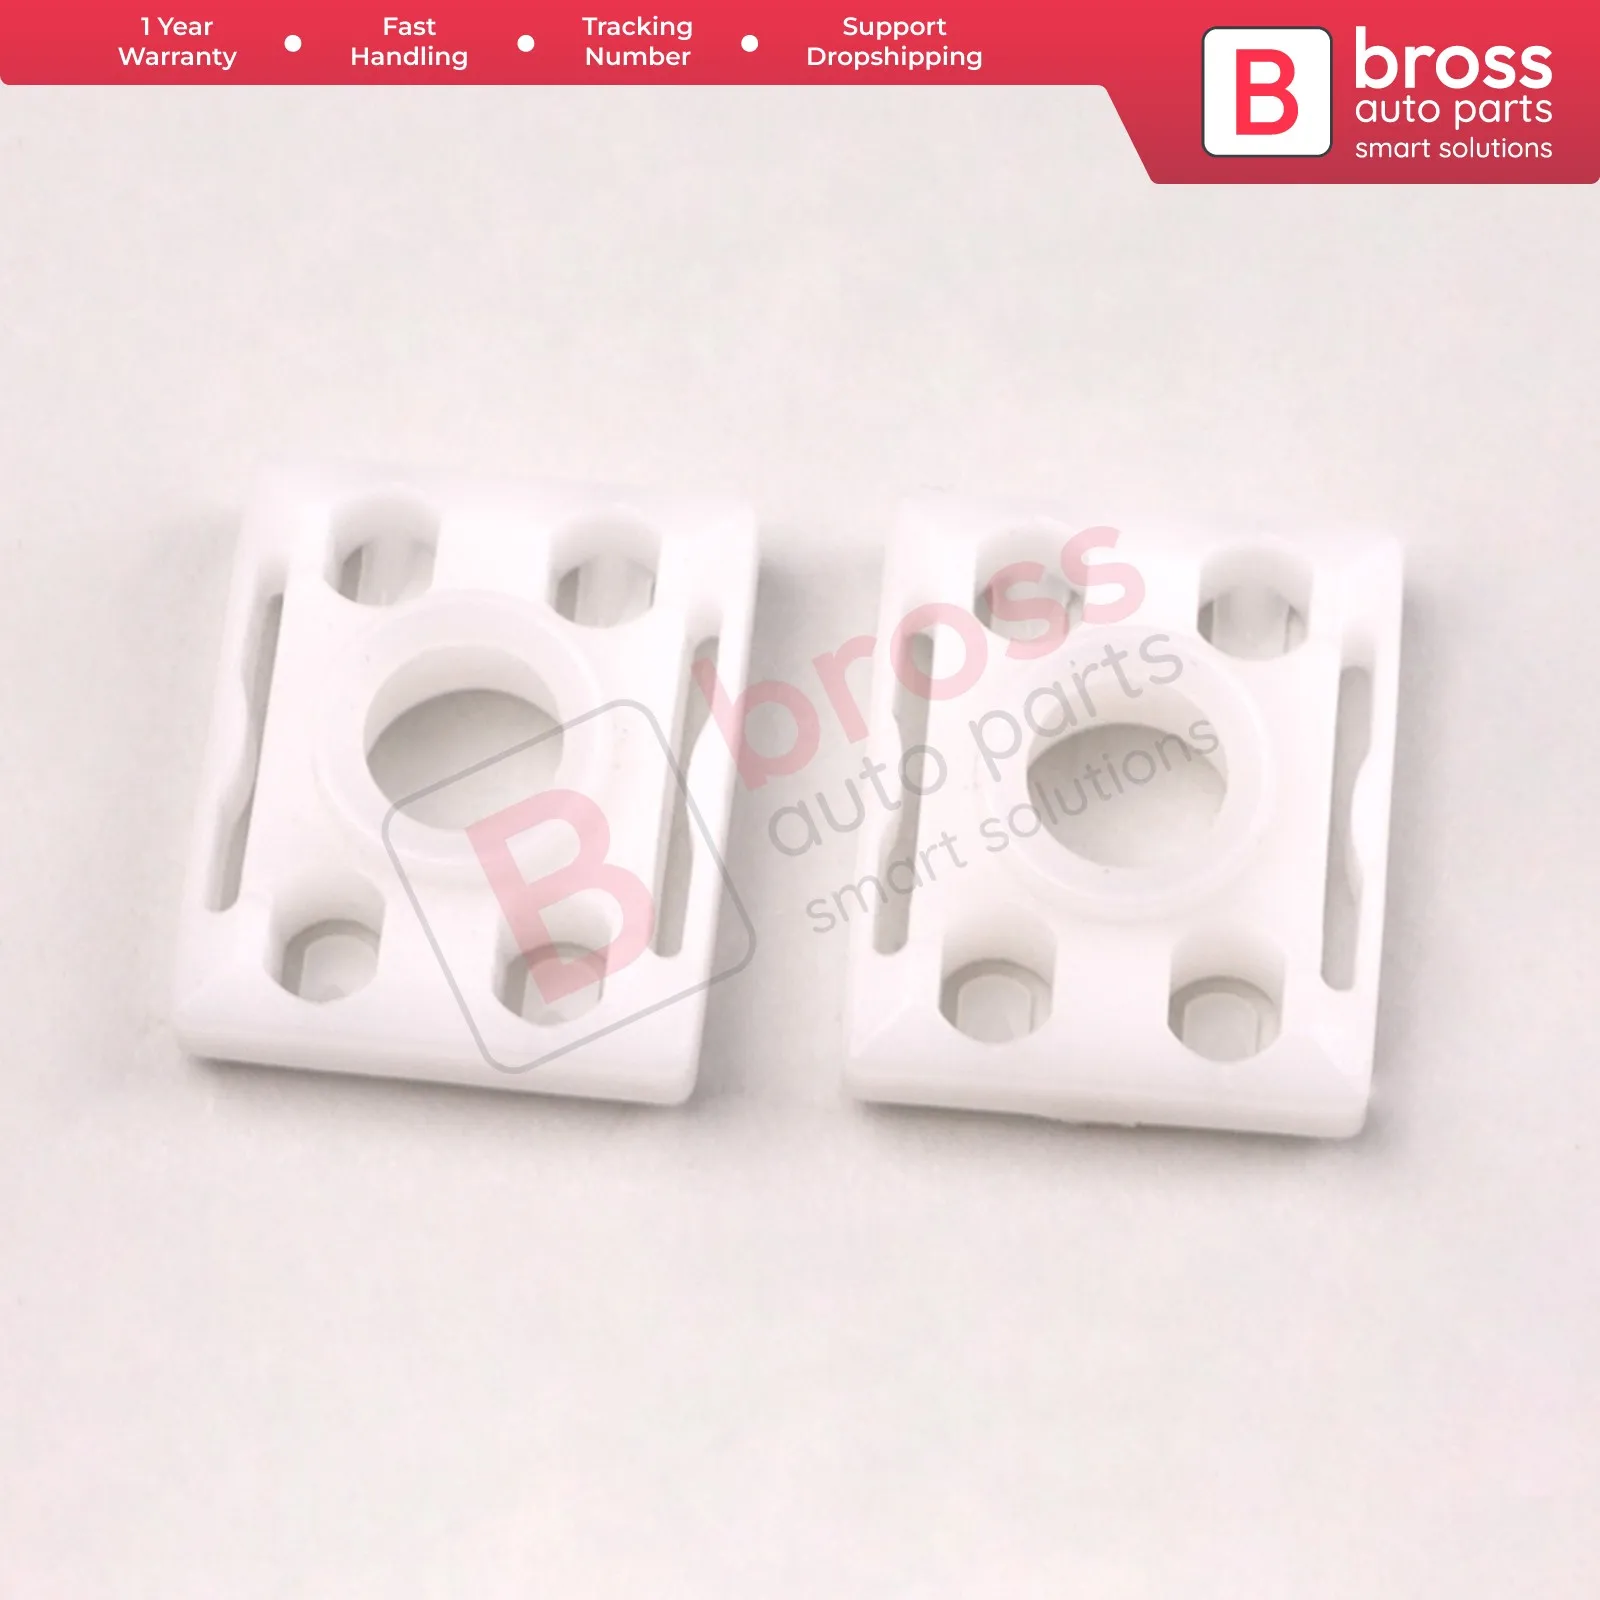 

Bross Auto Parts BWR5368 2 Pieces Window Regulator Sliding Retainer Jaw Clips for Mercedes Sprinter VW Crafter Made in Turkey